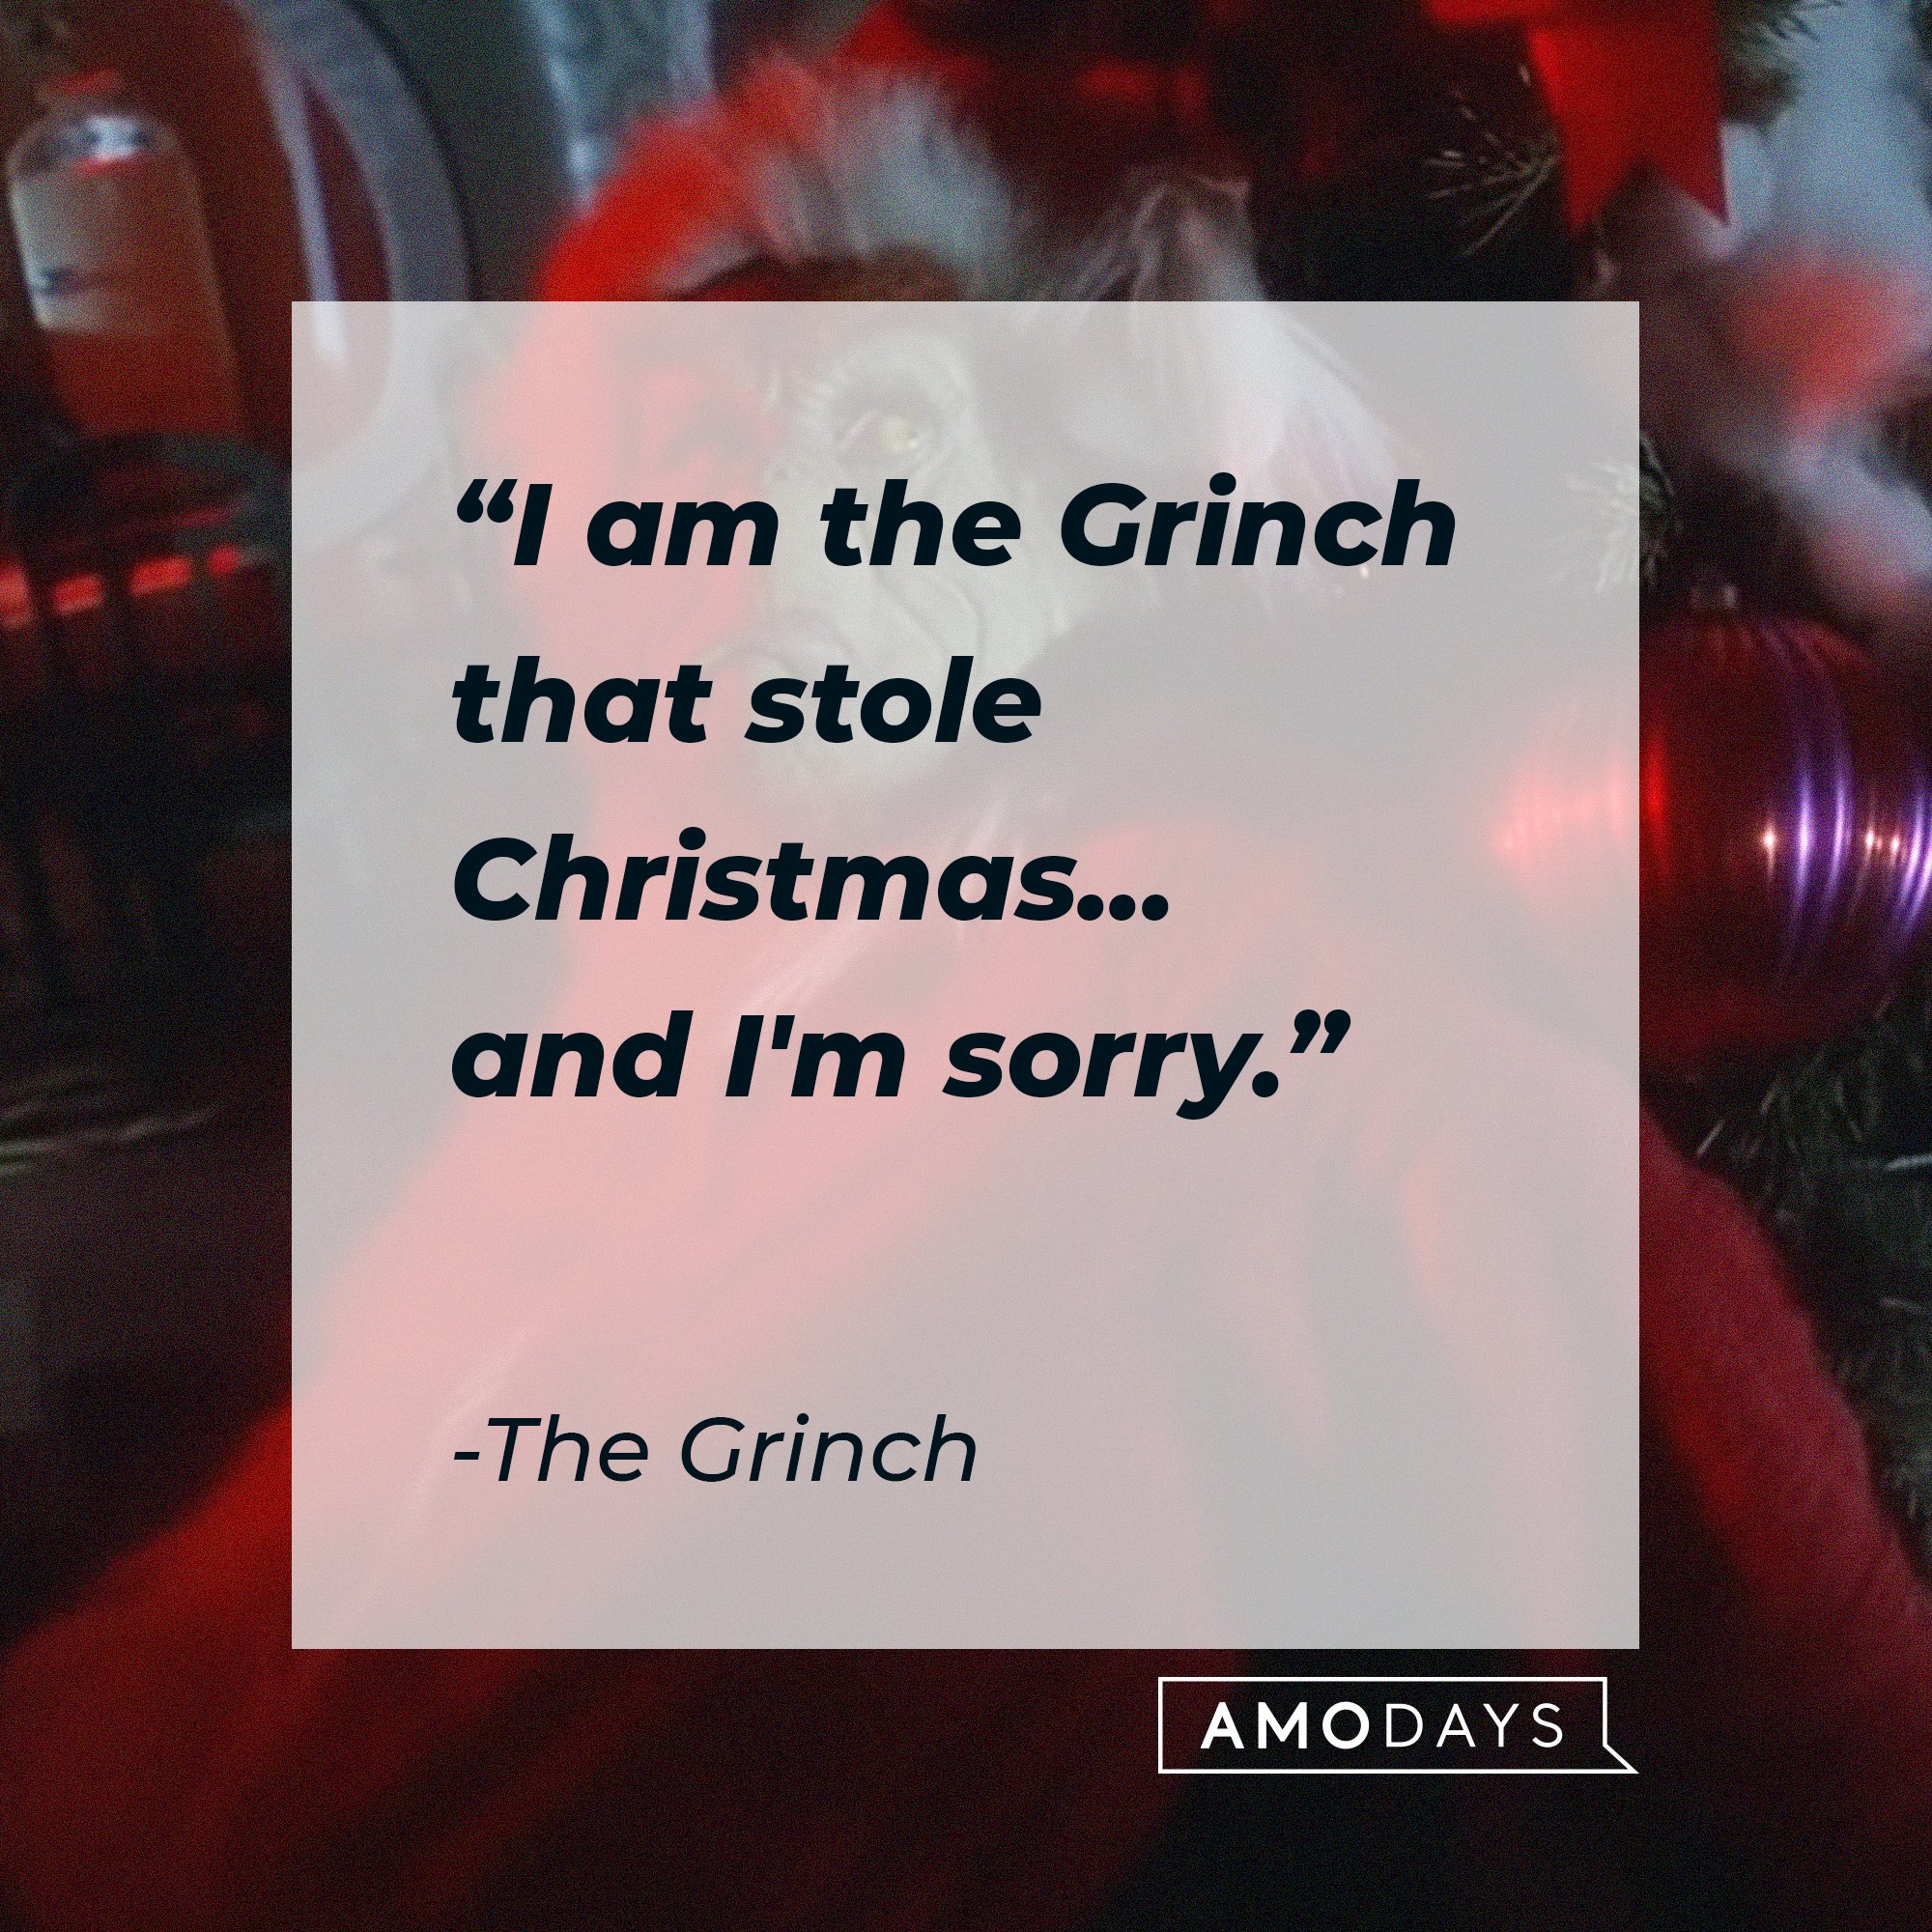 The Grinch's quote: "I am the Grinch that stole Christmas... and I'm sorry." | Image: AmoDays